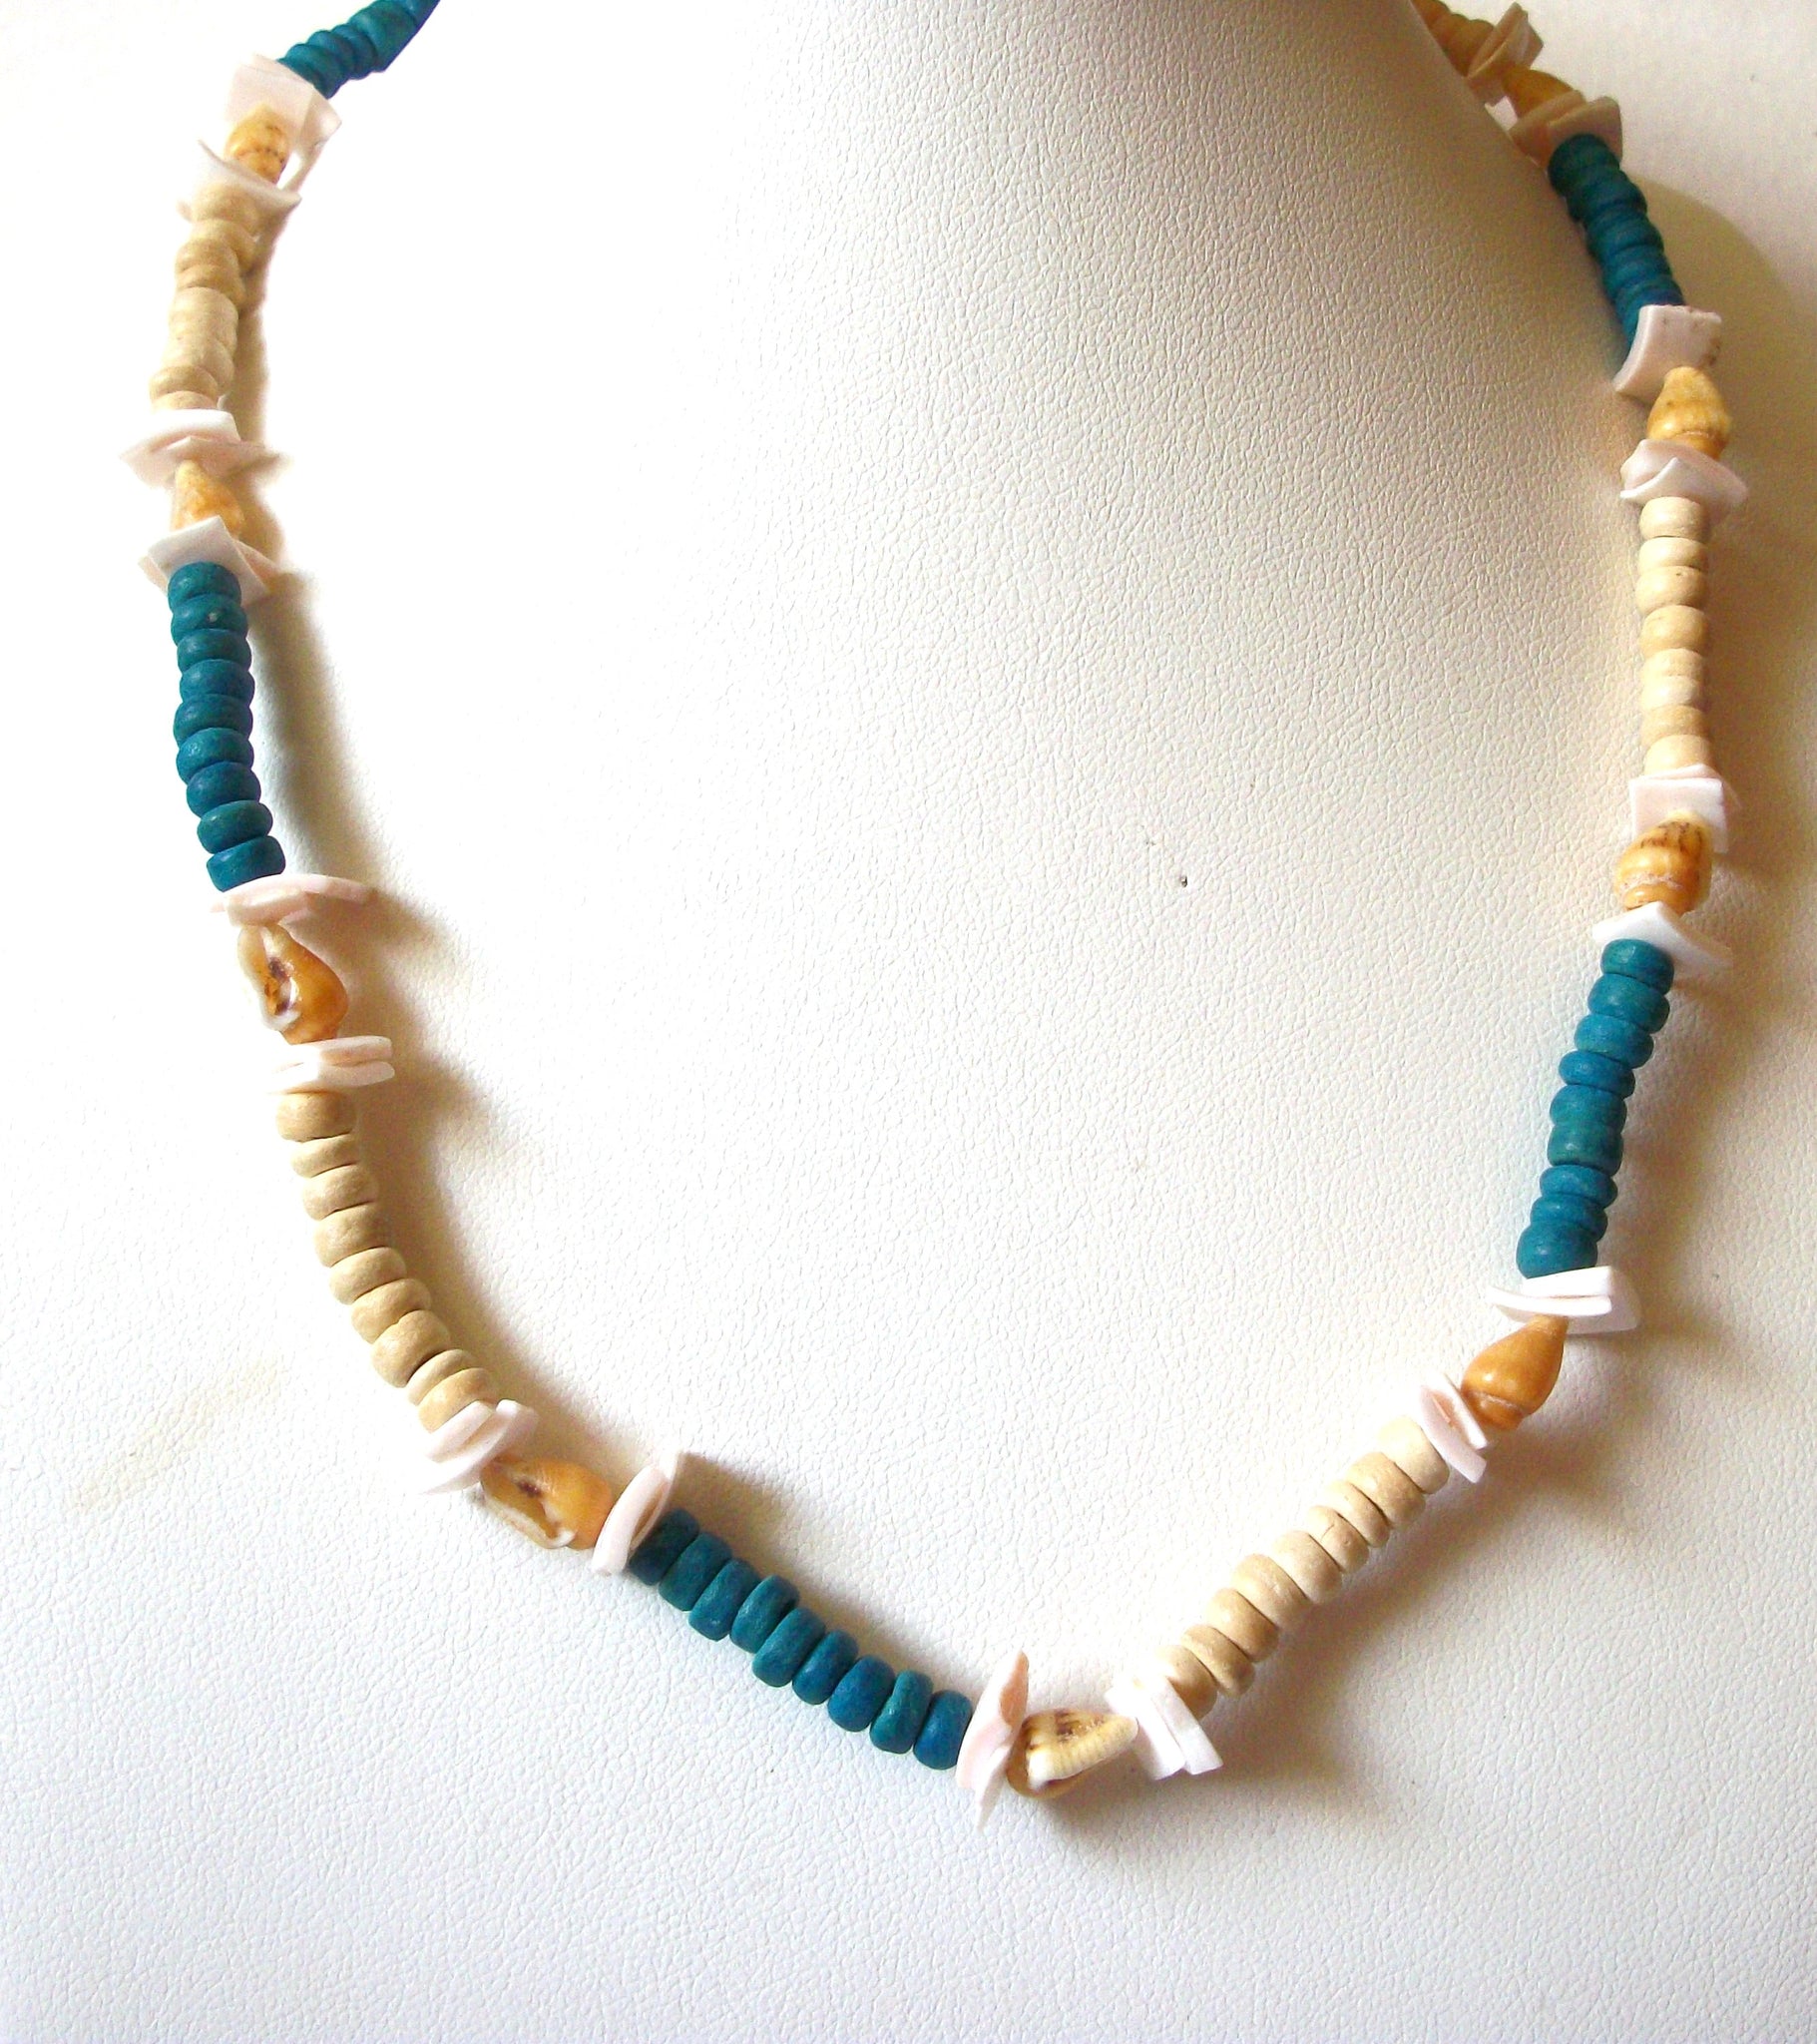 Bohemian Wood Shell Necklace 81120